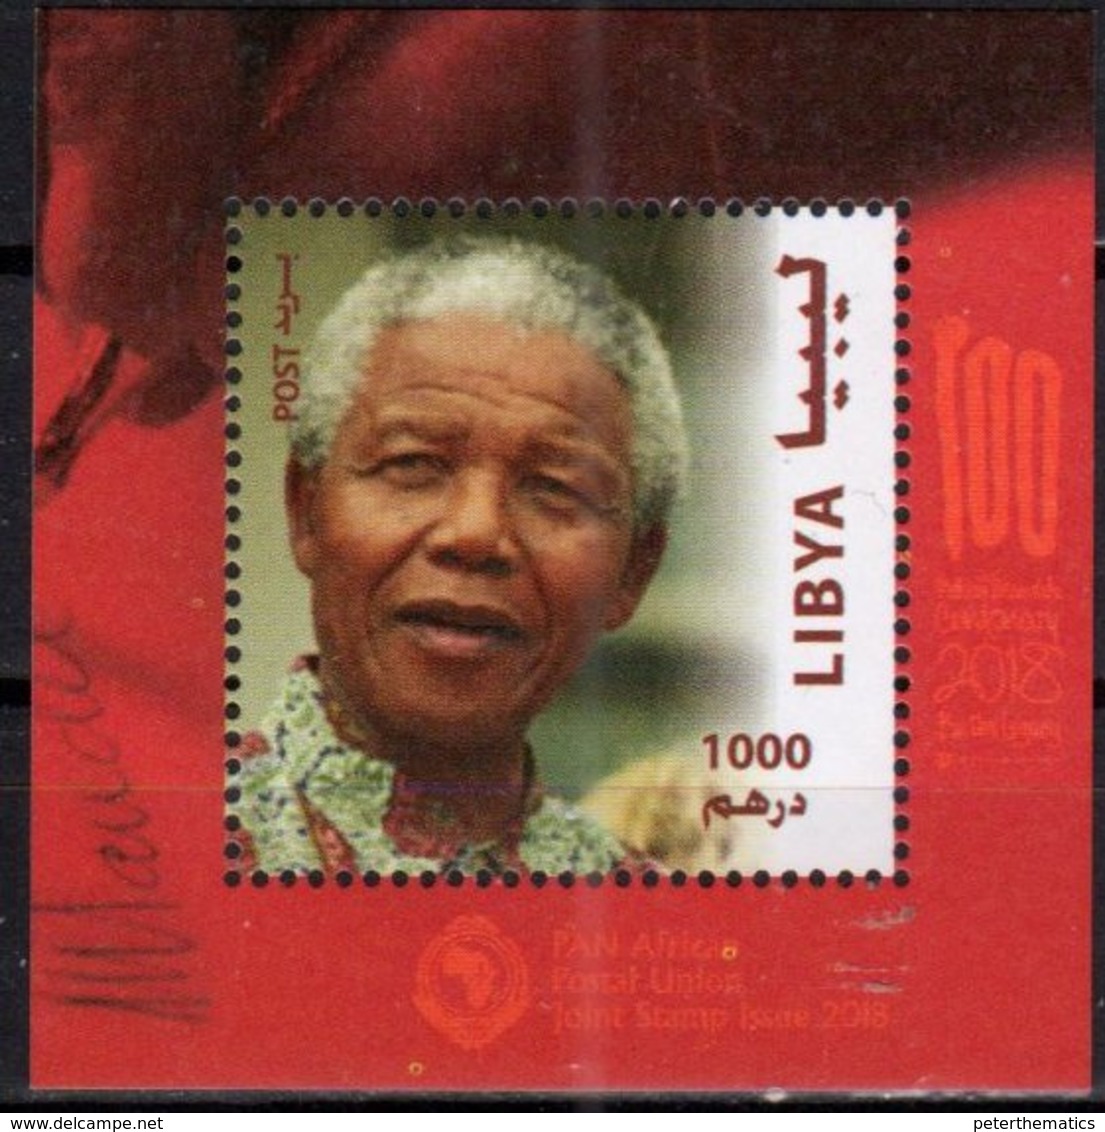 LIBYA, 2018,MNH, JOINT ISSUE, NELSON MANDELA, S/SHEET - Joint Issues